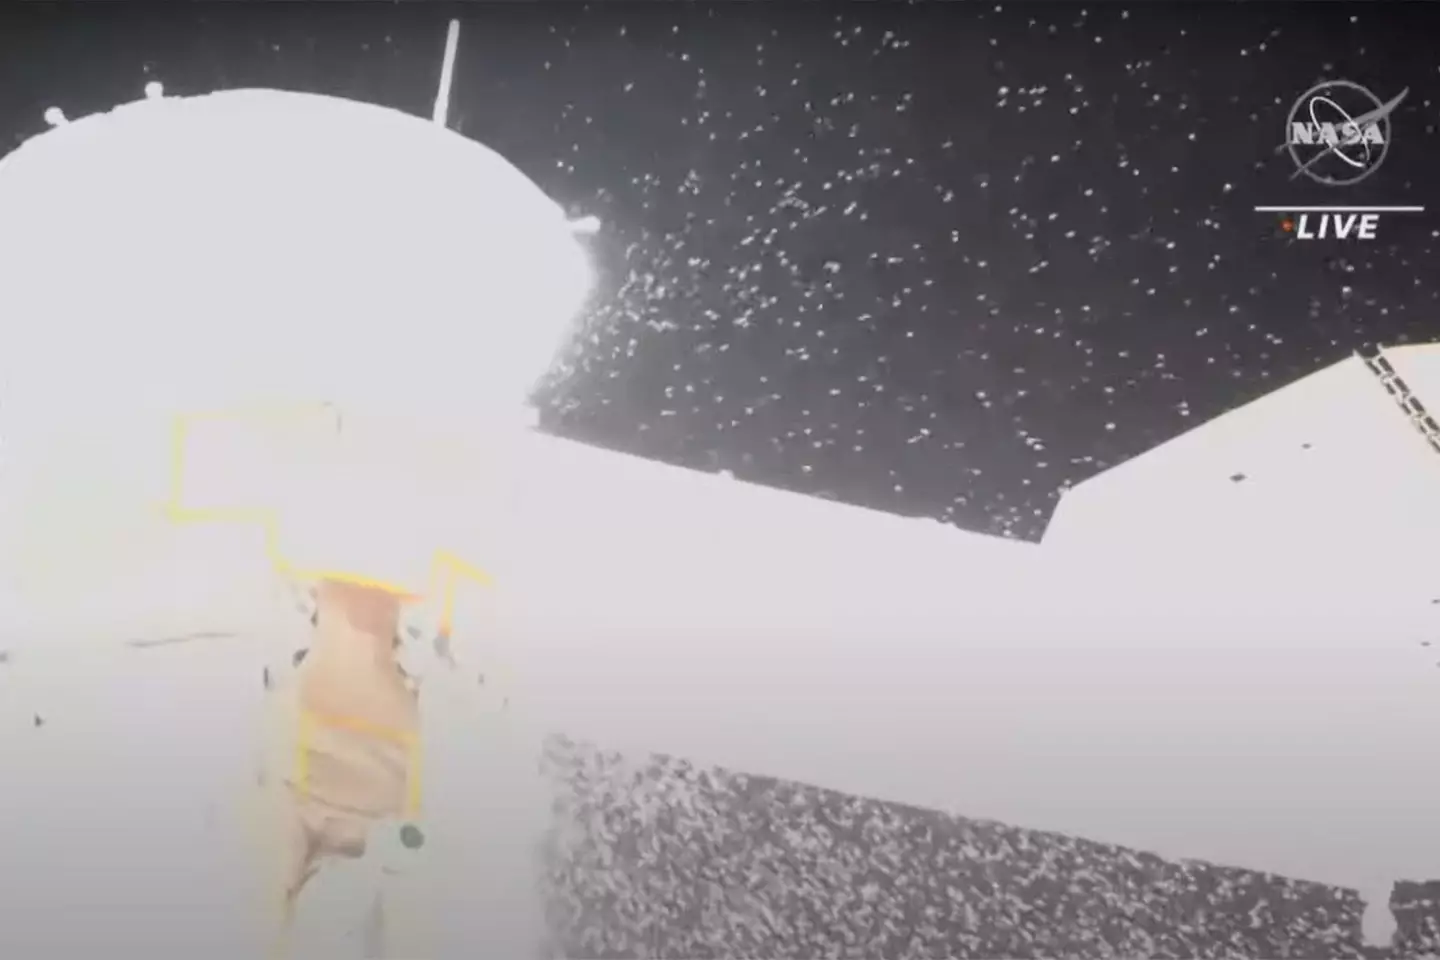 A screenshot showing the leak in the spacecraft.